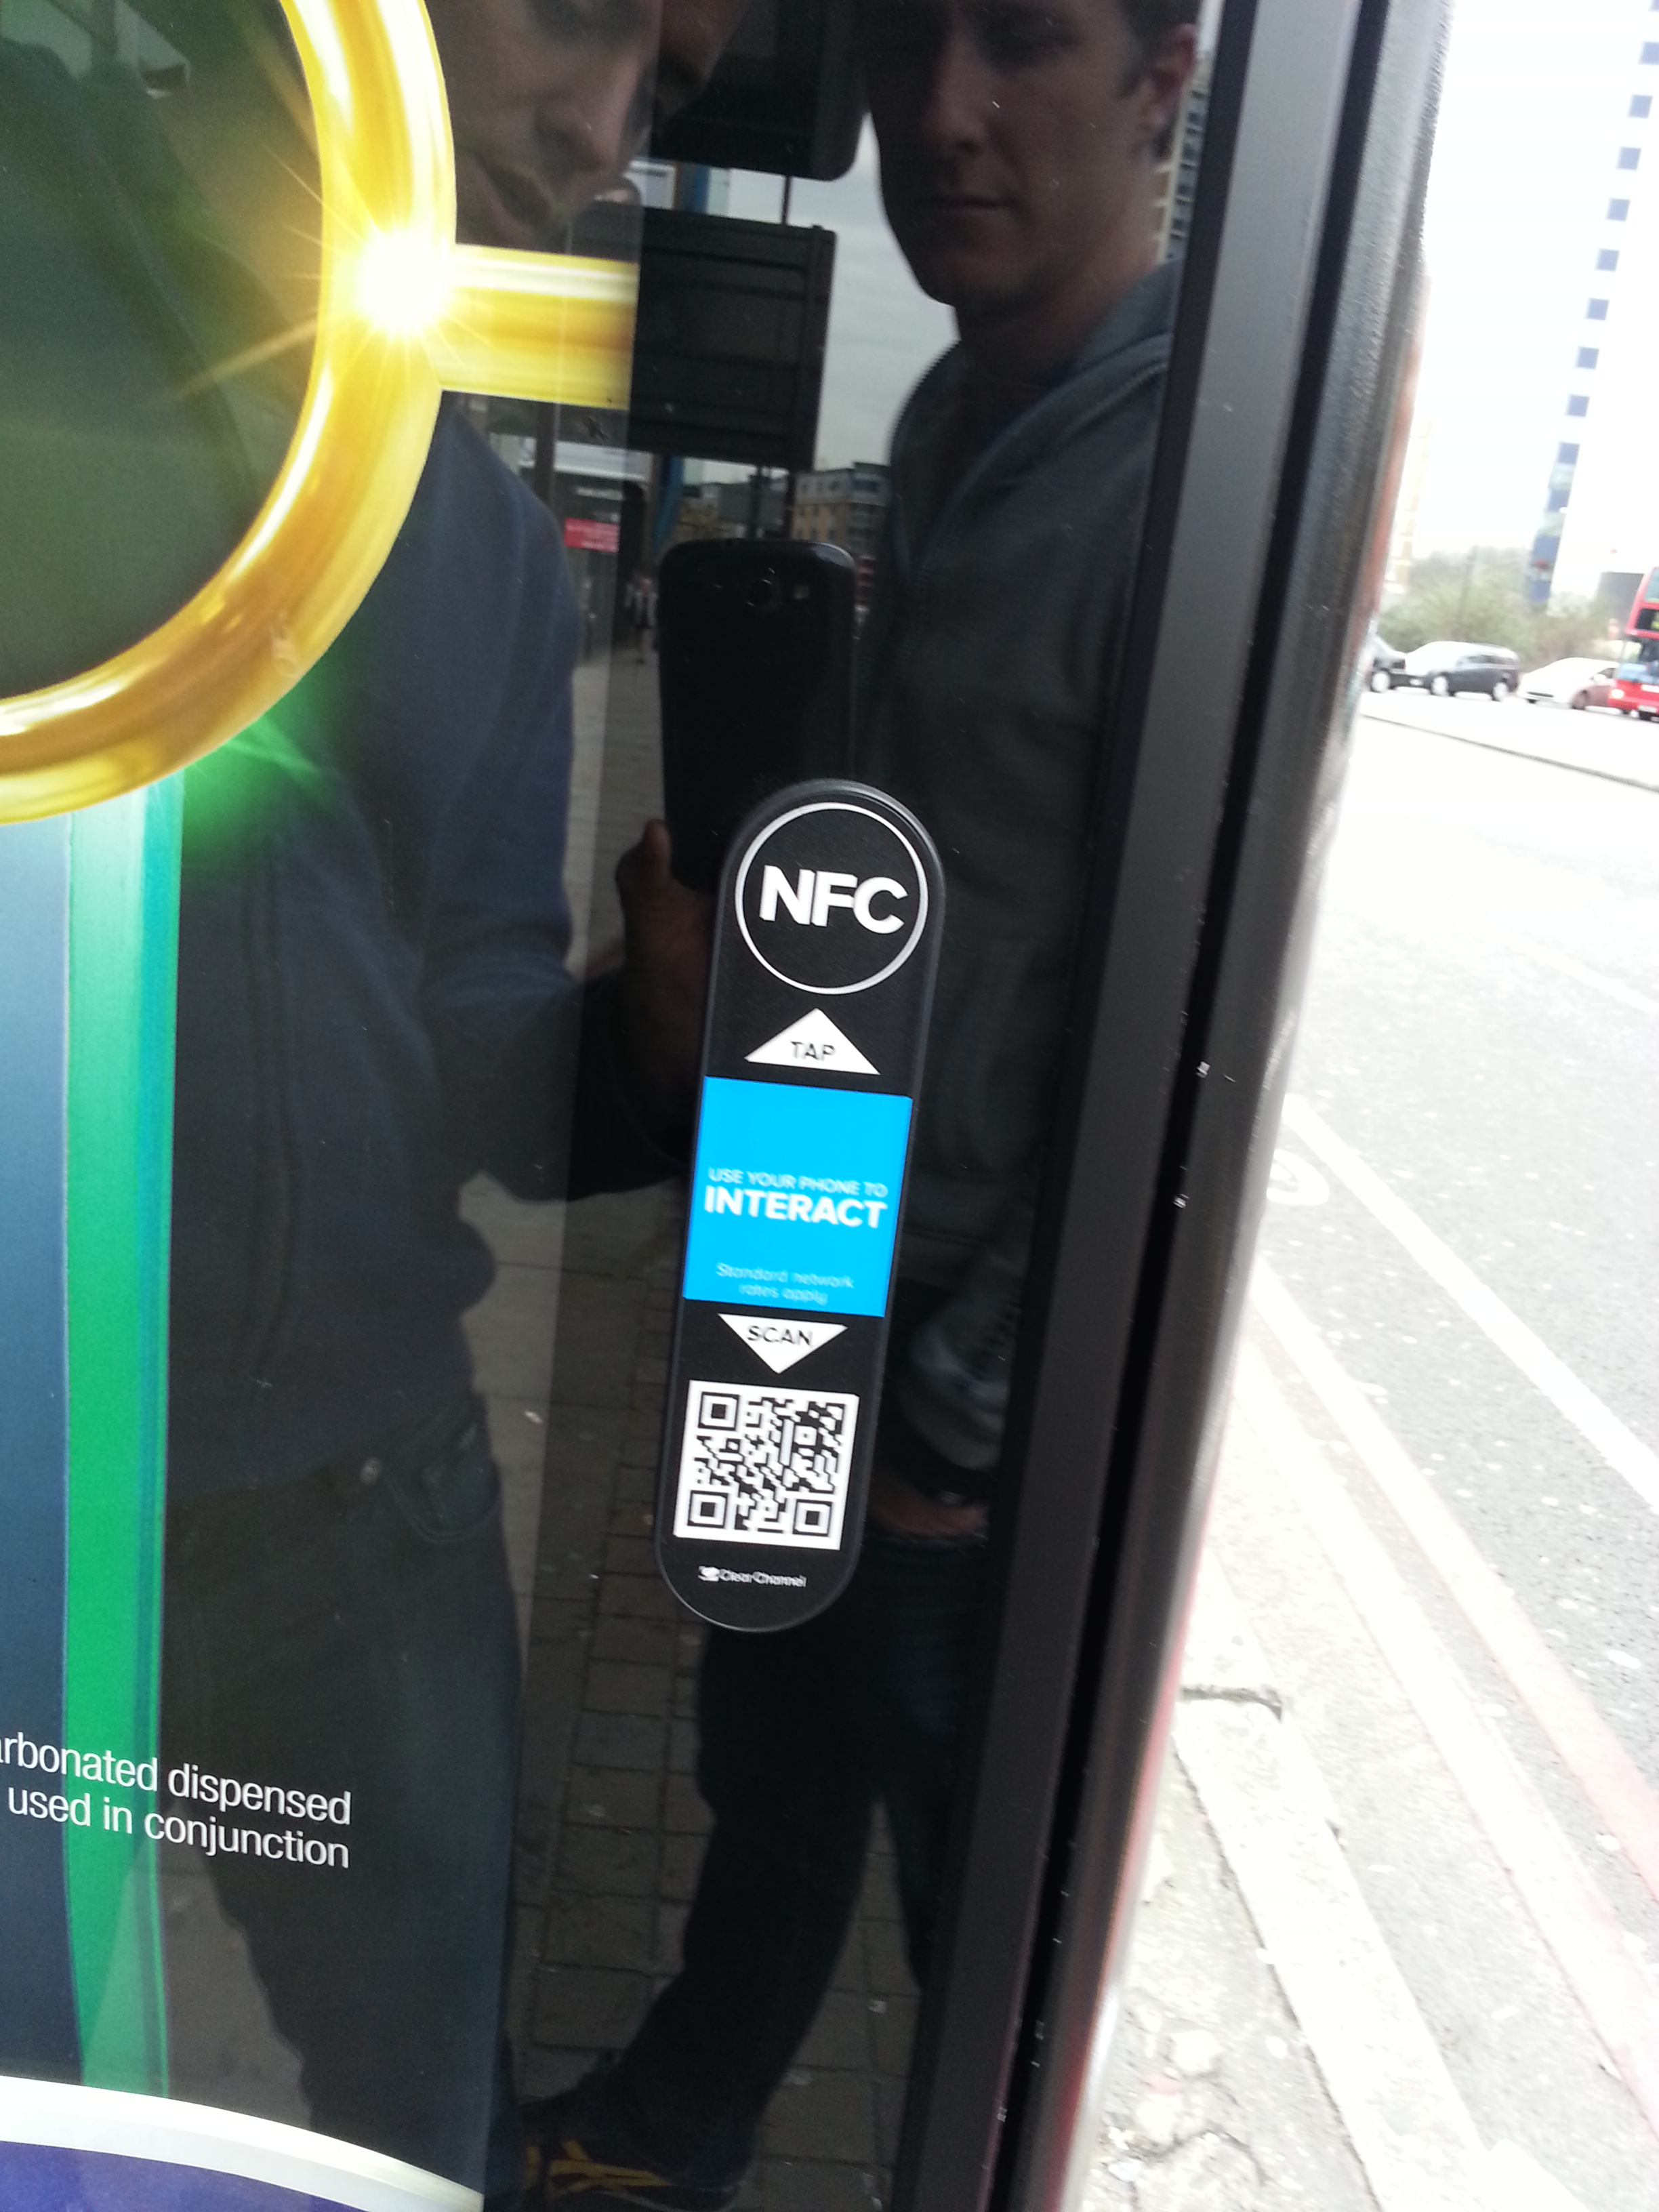 Omnichannel is coming, NFC tag